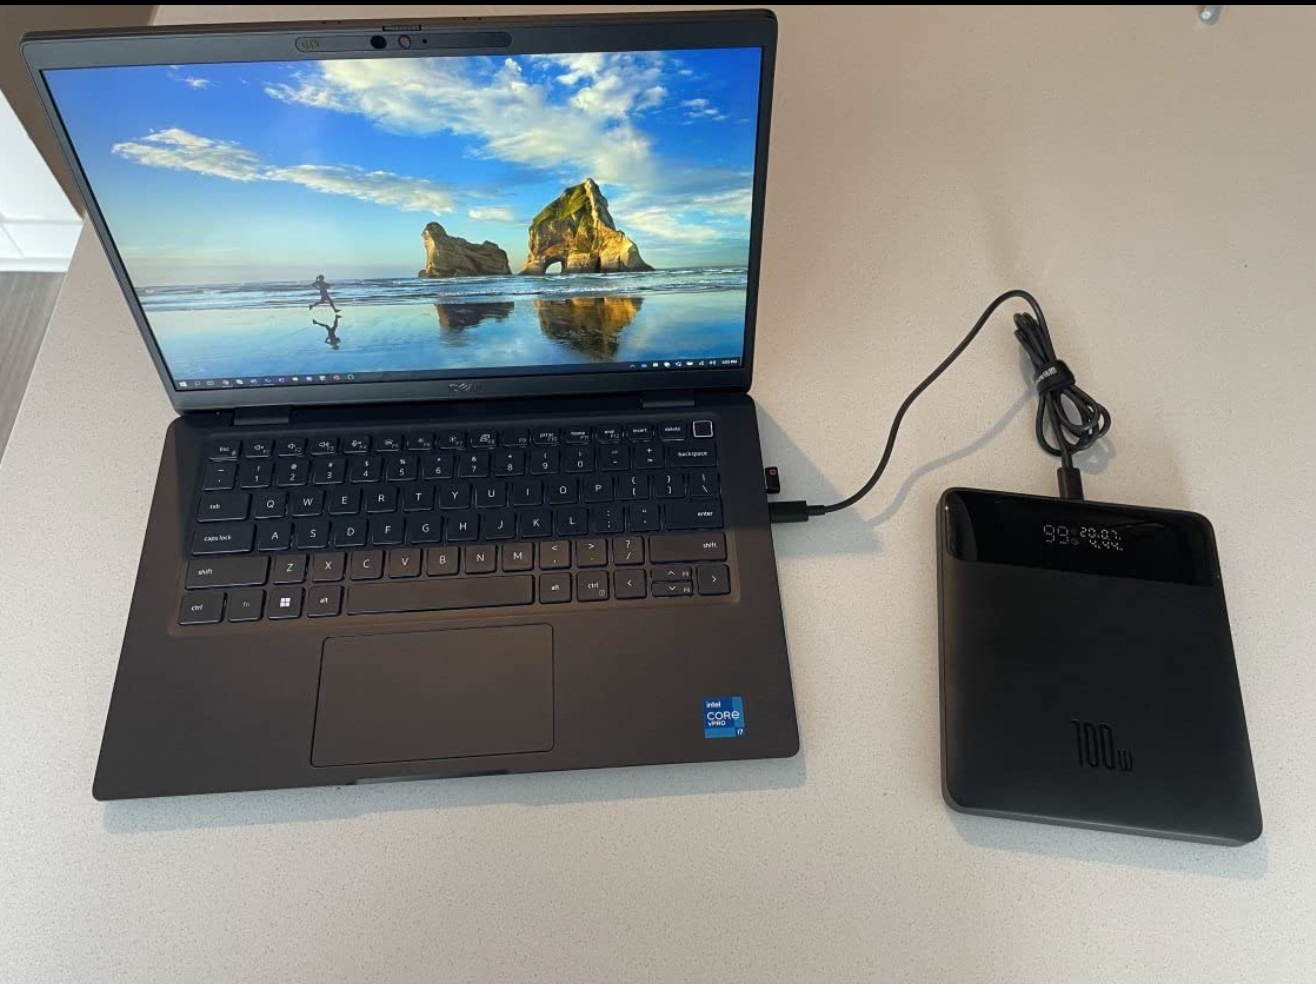 A laptop connected to a small square shaped black charger bank